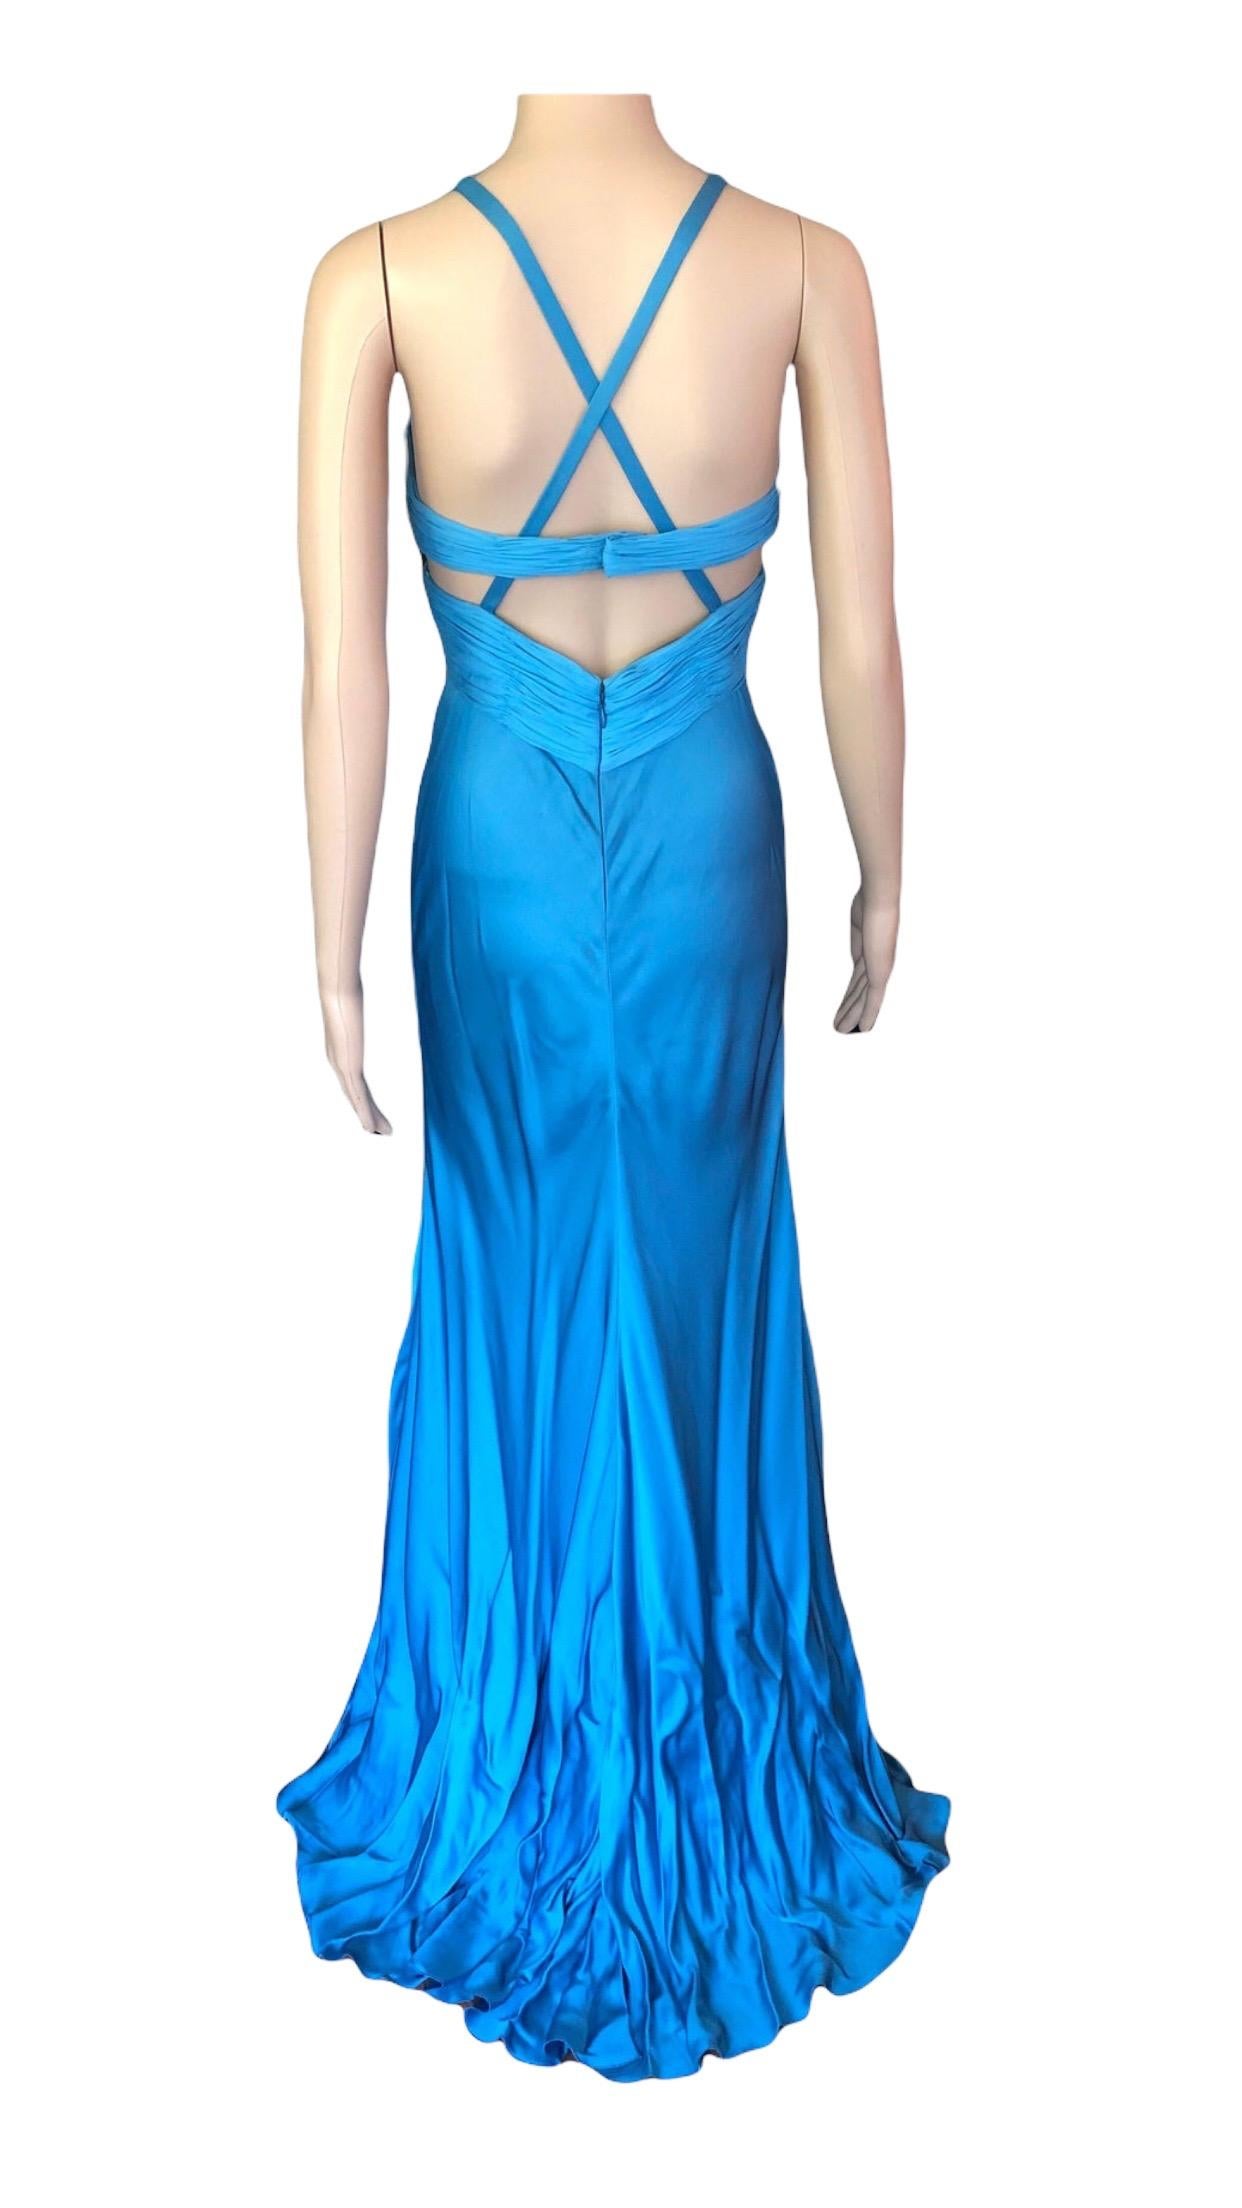 Versace S/S 2004 Bustier Open Back High Slit Blue Dress Gown For Sale 5